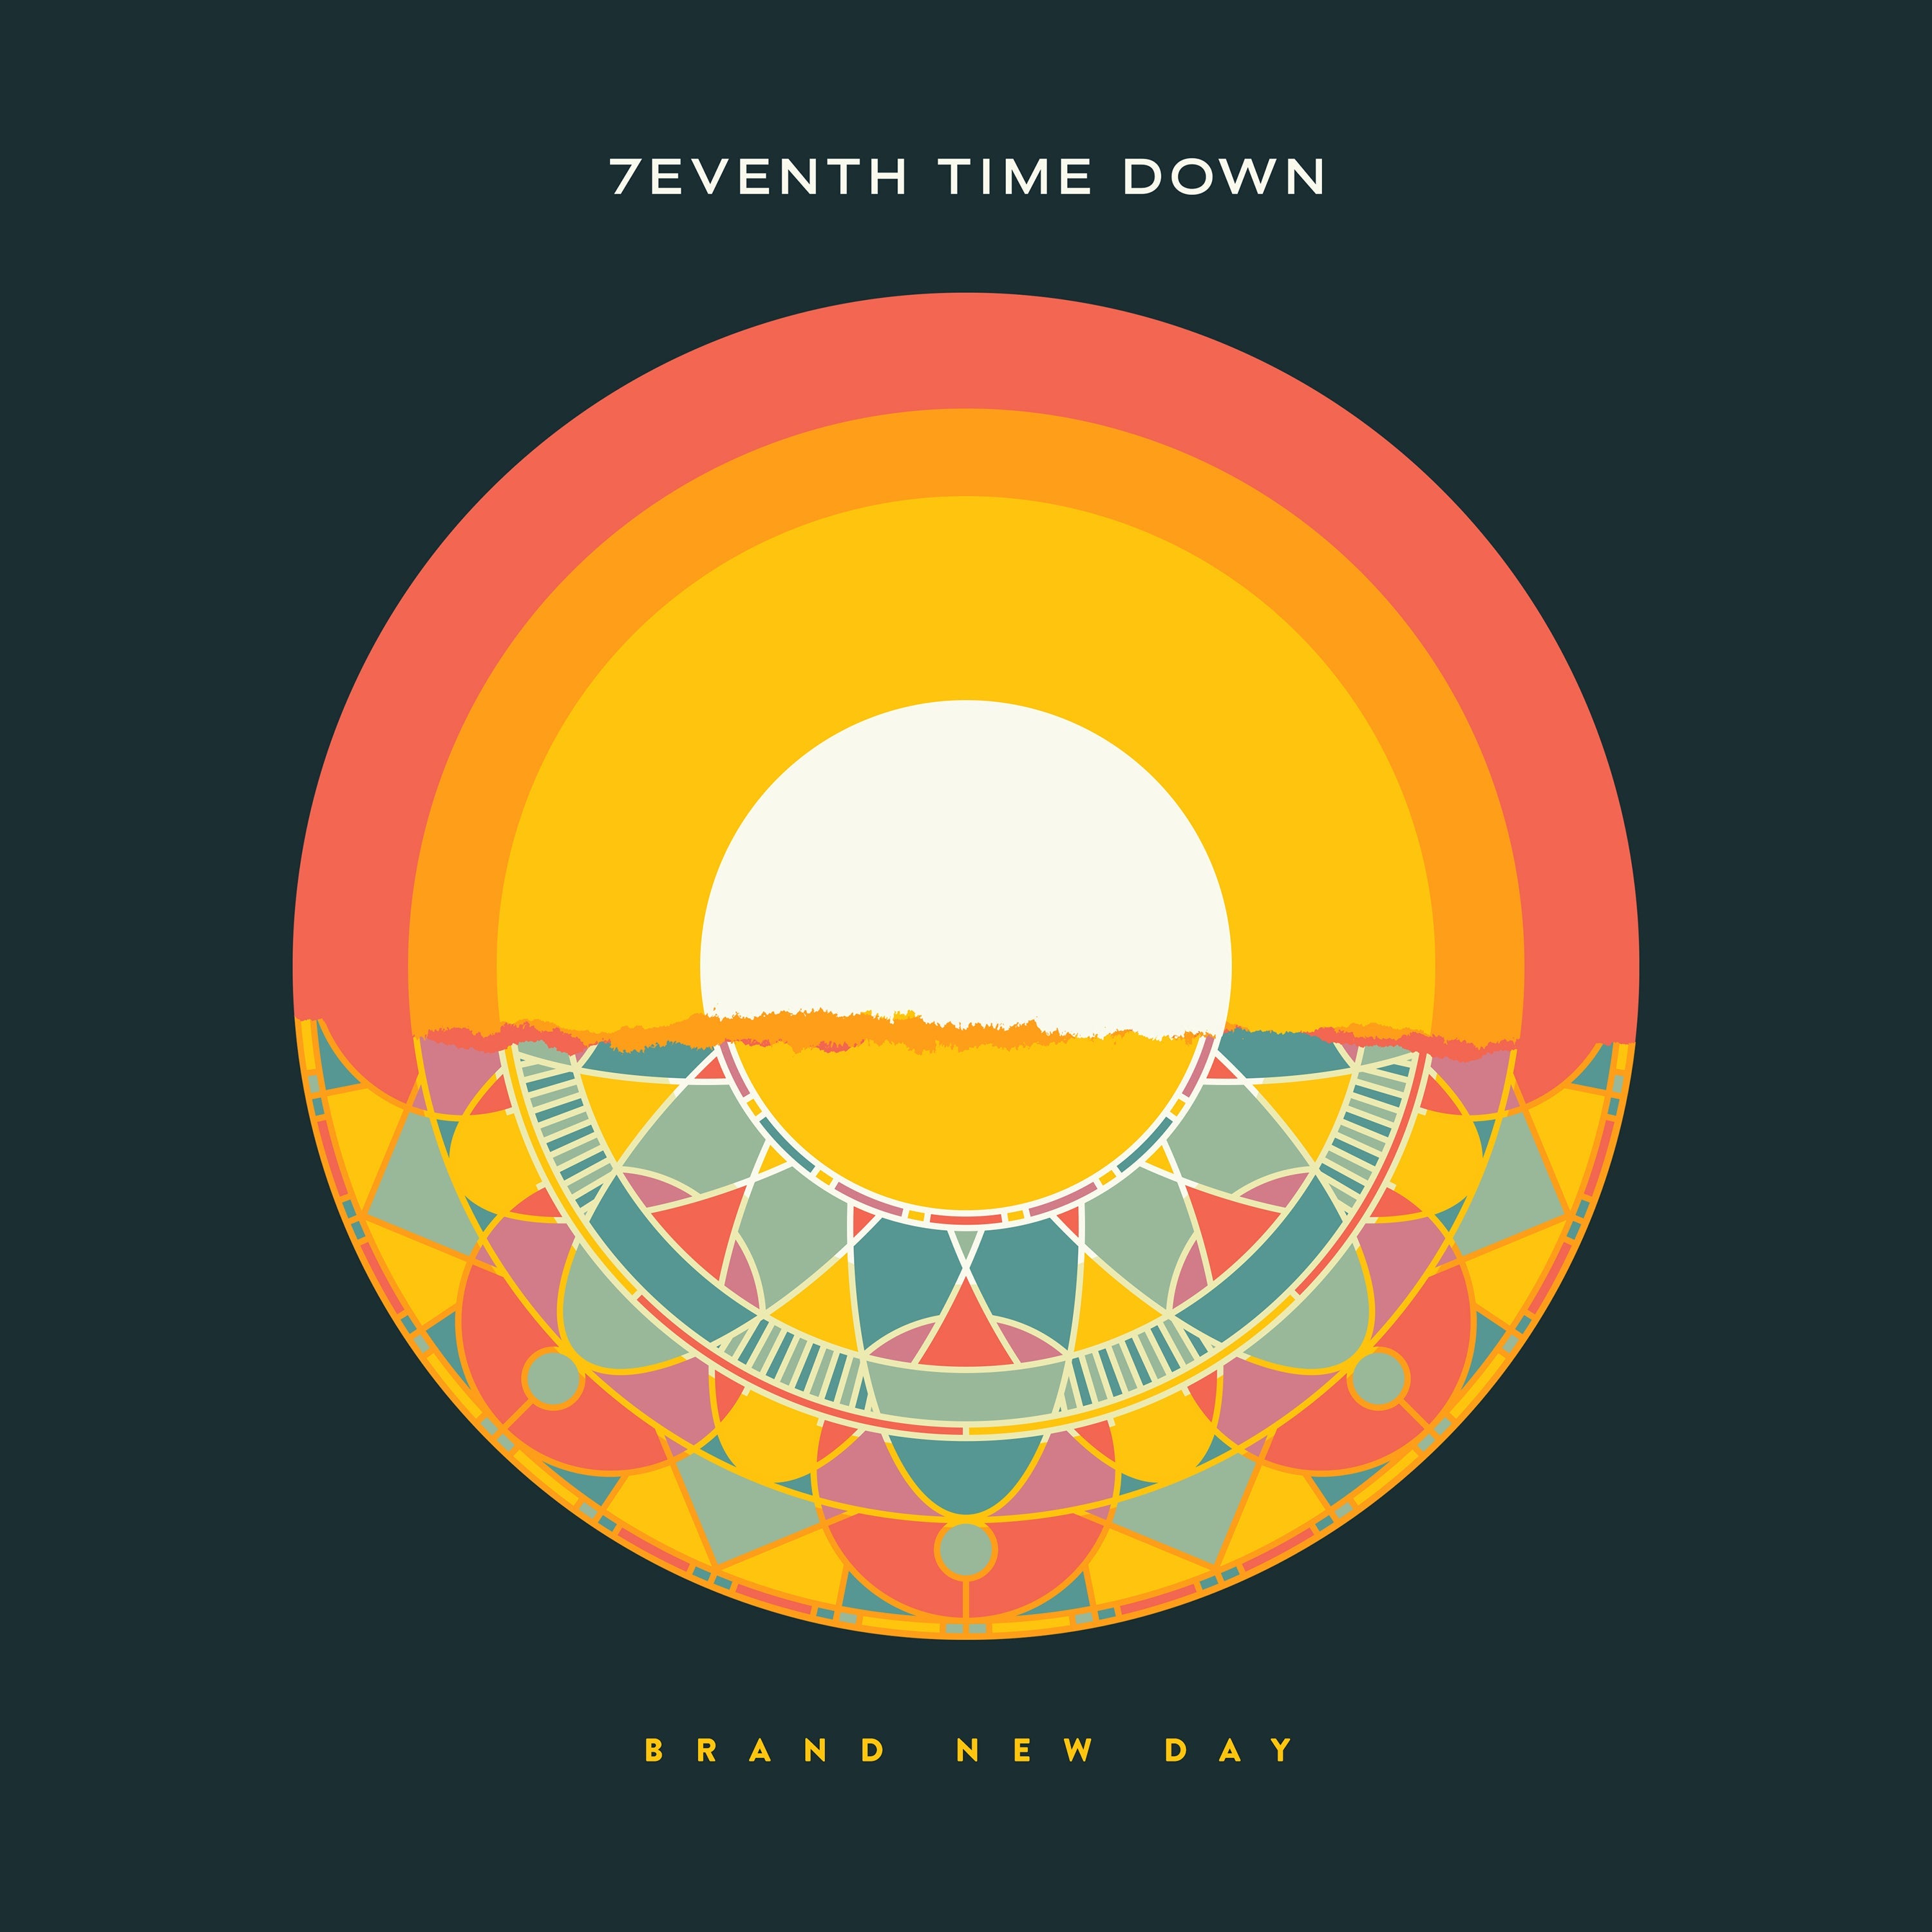 image of a cd for the band 7eventh time down titled brand new day. image of a circle in the center that is orange, and yellow and has an abstract design at the bottom